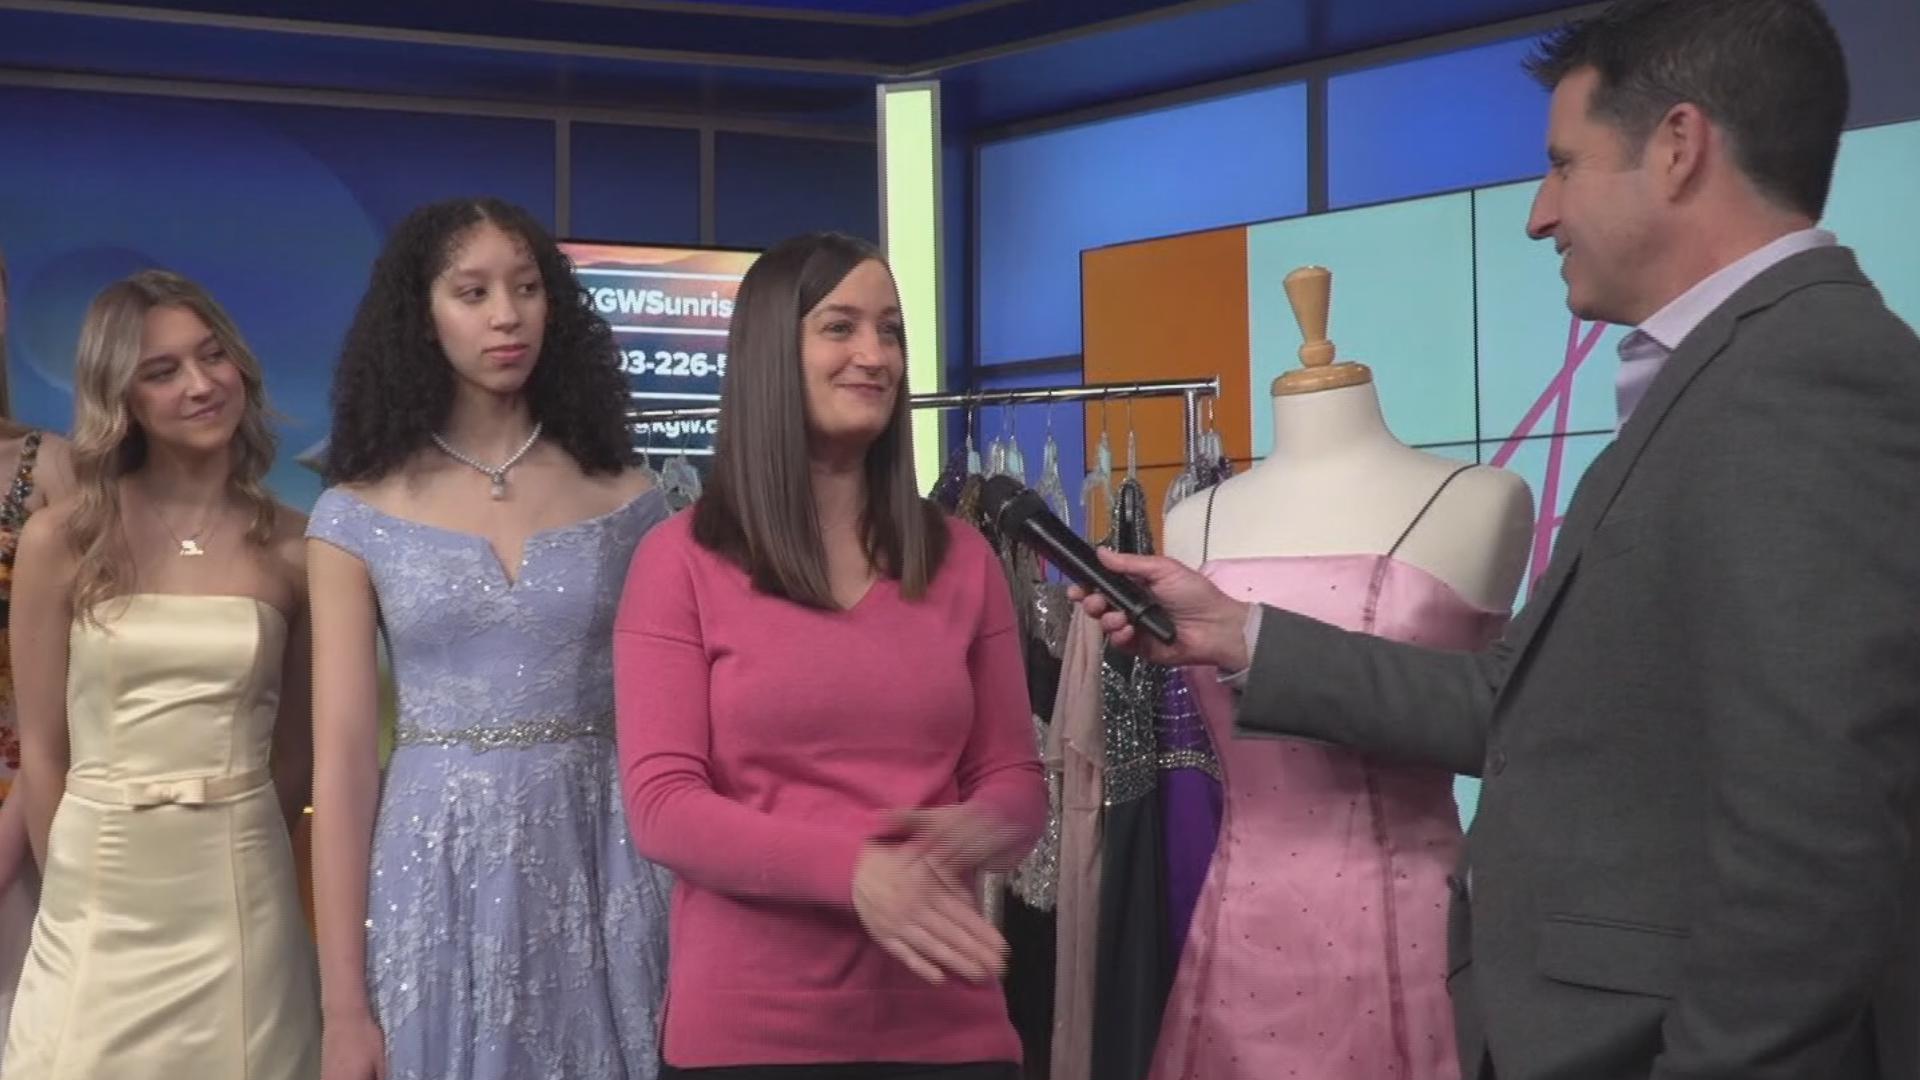 High school students have the chance to pick from thousands of free prom dresses at the Oregon Convention Center. KGW Sunrise got a preview of the giveaway.